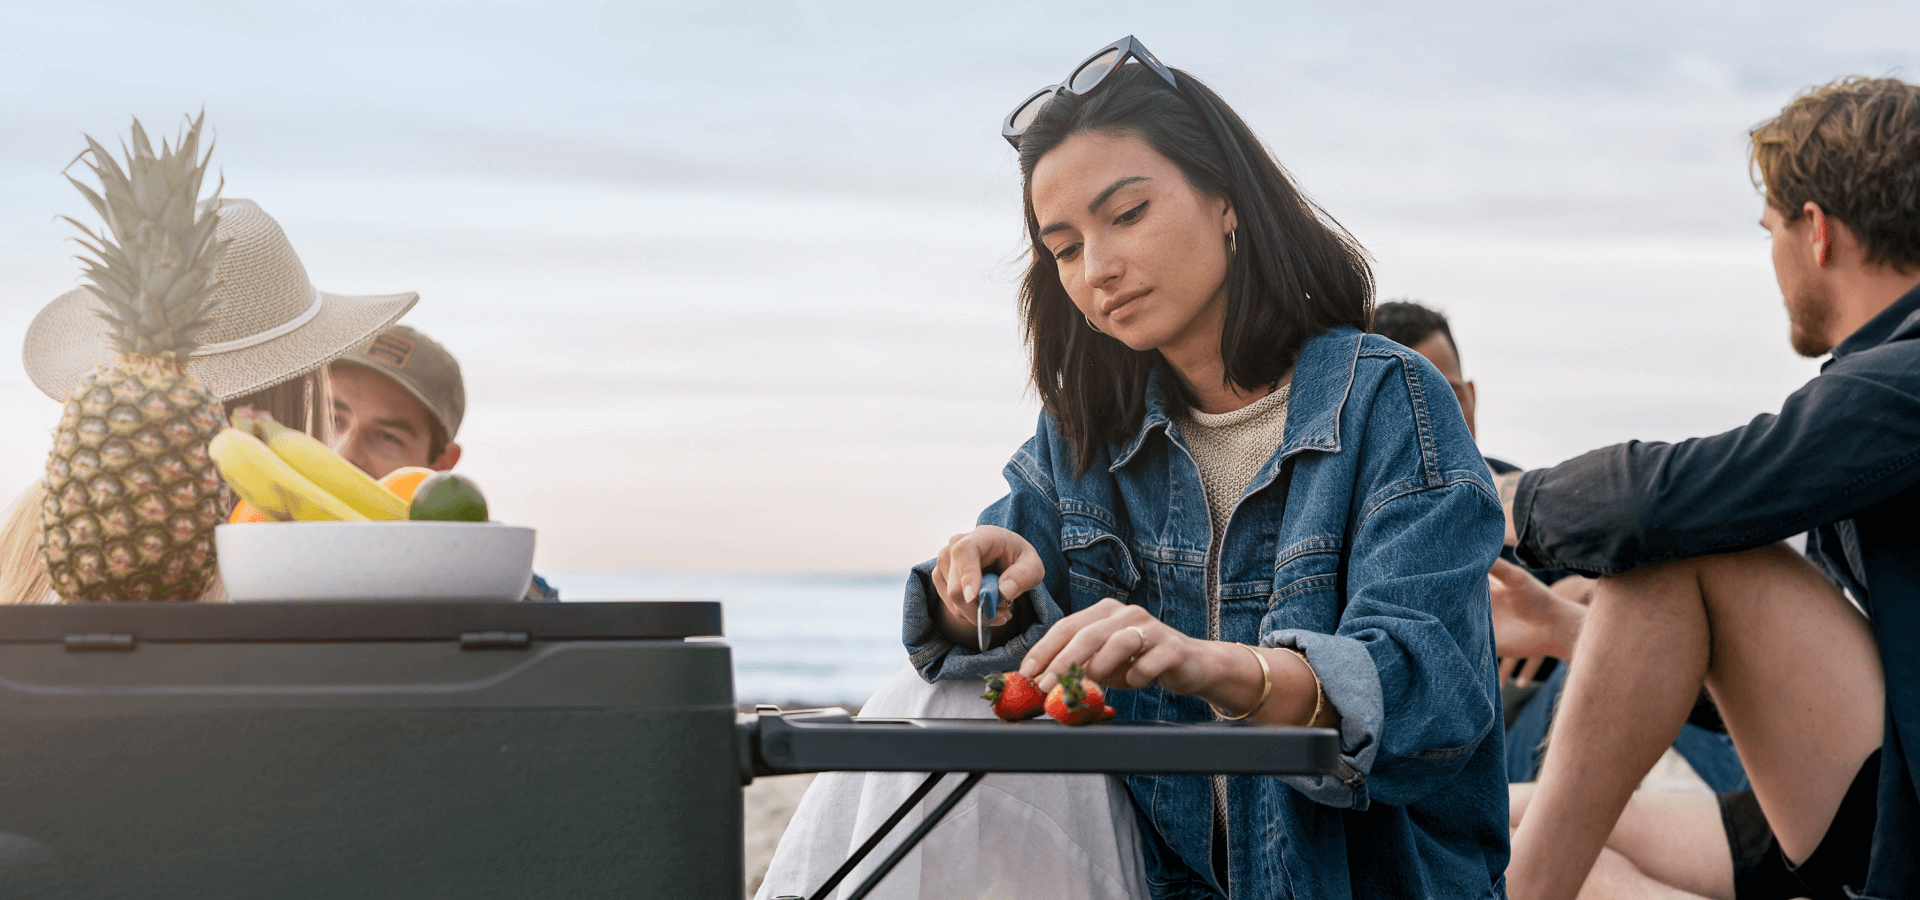 Anker Surfing Anker Https://Www.youtube.com/Watch?V=J3Sfx8Nhsty &Lt;Ul Class=&Quot;List-Bullet1&Quot;&Gt; &Lt;Li&Gt;Long-Lasting 299Wh Battery-Powered Cooler&Lt;/Li&Gt; &Lt;Li Class=&Quot;Ace-Line Ace-Line Old-Record-Id-Rgygdcc4Soqwmmx2B9Ich42Vn0E&Quot; Data-List=&Quot;Bullet&Quot;&Gt; &Lt;Div&Gt;0% Ice, 100% Storage&Lt;/Div&Gt;&Lt;/Li&Gt; &Lt;Li Class=&Quot;Ace-Line Ace-Line Old-Record-Id-Ymmed2Kssogammxgig5Cs7Krndg&Quot; Data-List=&Quot;Bullet&Quot;&Gt; &Lt;Div&Gt;100W Solar Input (One Of Four Ways To Charge)&Lt;/Div&Gt;&Lt;/Li&Gt; &Lt;Li Class=&Quot;Ace-Line Ace-Line Old-Record-Id-Jycidik8Koy4Gqxixljcpkmmnme&Quot; Data-List=&Quot;Bullet&Quot;&Gt; &Lt;Div&Gt;-4℉ - 68℉ (-20 - 20°C) Cooling Range&Lt;/Div&Gt;&Lt;/Li&Gt; &Lt;Li Class=&Quot;Ace-Line Ace-Line Old-Record-Id-O6Audgqaqo4E02Xwp9Zctmu1Nxf&Quot; Data-List=&Quot;Bullet&Quot;&Gt; &Lt;Div&Gt;Easytow™ Suitcase Design&Lt;/Div&Gt;&Lt;/Li&Gt; &Lt;Li Class=&Quot;Ace-Line Ace-Line Old-Record-Id-Bocad4Ooko0Cmoxibijciqrjnke&Quot; Data-List=&Quot;Bullet&Quot;&Gt; &Lt;Div&Gt;Efficient Cooling System&Lt;/Div&Gt;&Lt;/Li&Gt; &Lt;Li Class=&Quot;Ace-Line Ace-Line Old-Record-Id-Skw4Dckagoiyi6Xgr8Ycsucvnlf&Quot; Data-List=&Quot;Bullet&Quot;&Gt; &Lt;Div&Gt;Smart App Control&Lt;/Div&Gt;&Lt;/Li&Gt; &Lt;/Ul&Gt; Anker Anker Everfrost Powered Cooler 30 - A17A02M1